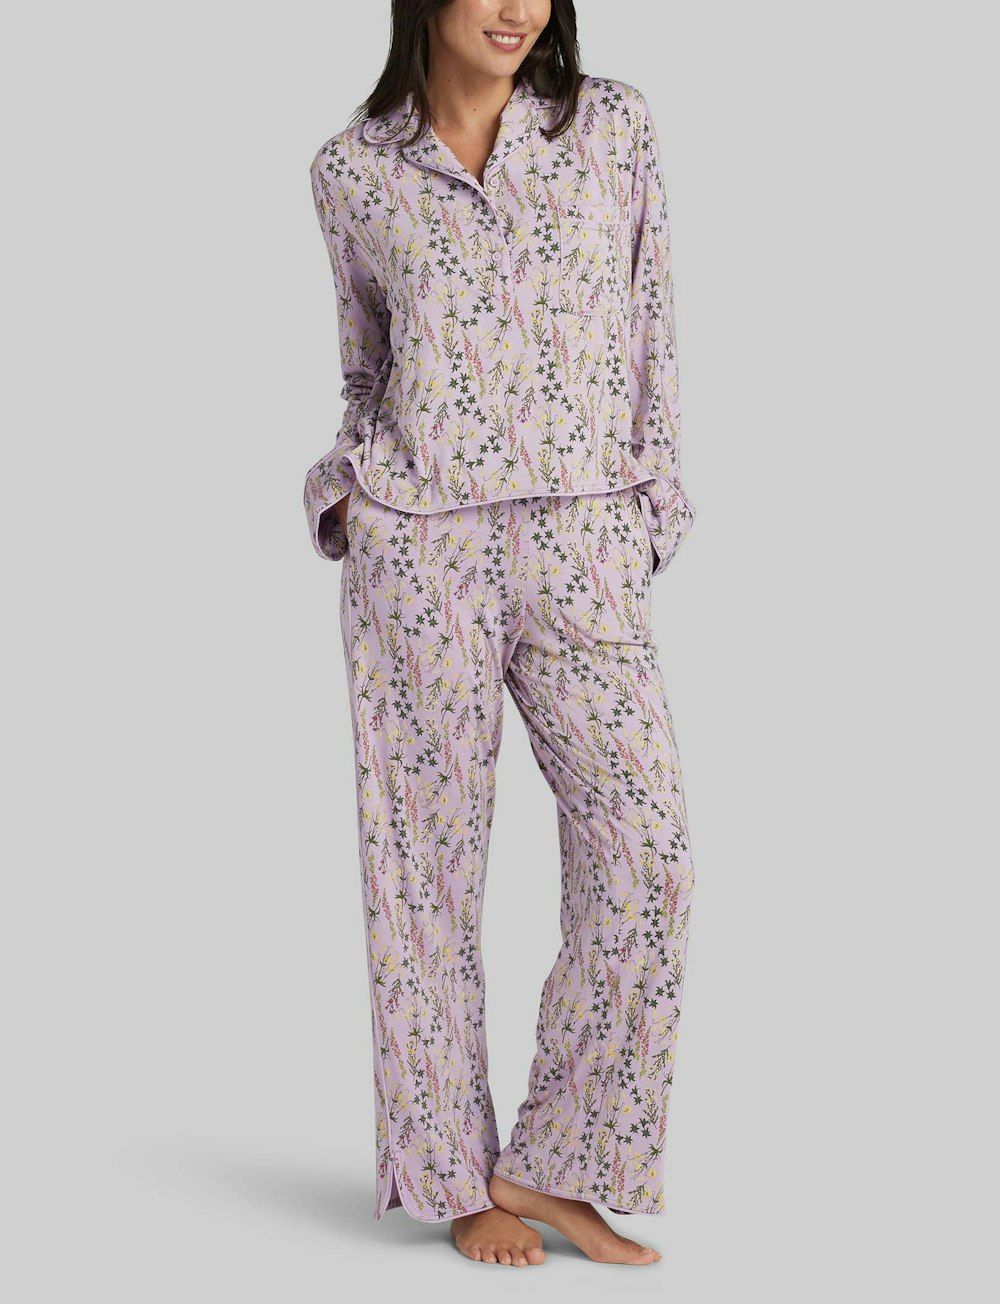 Women's Downtime Pullover Long Sleeve Pajama Top & Pant Set | Tommy John